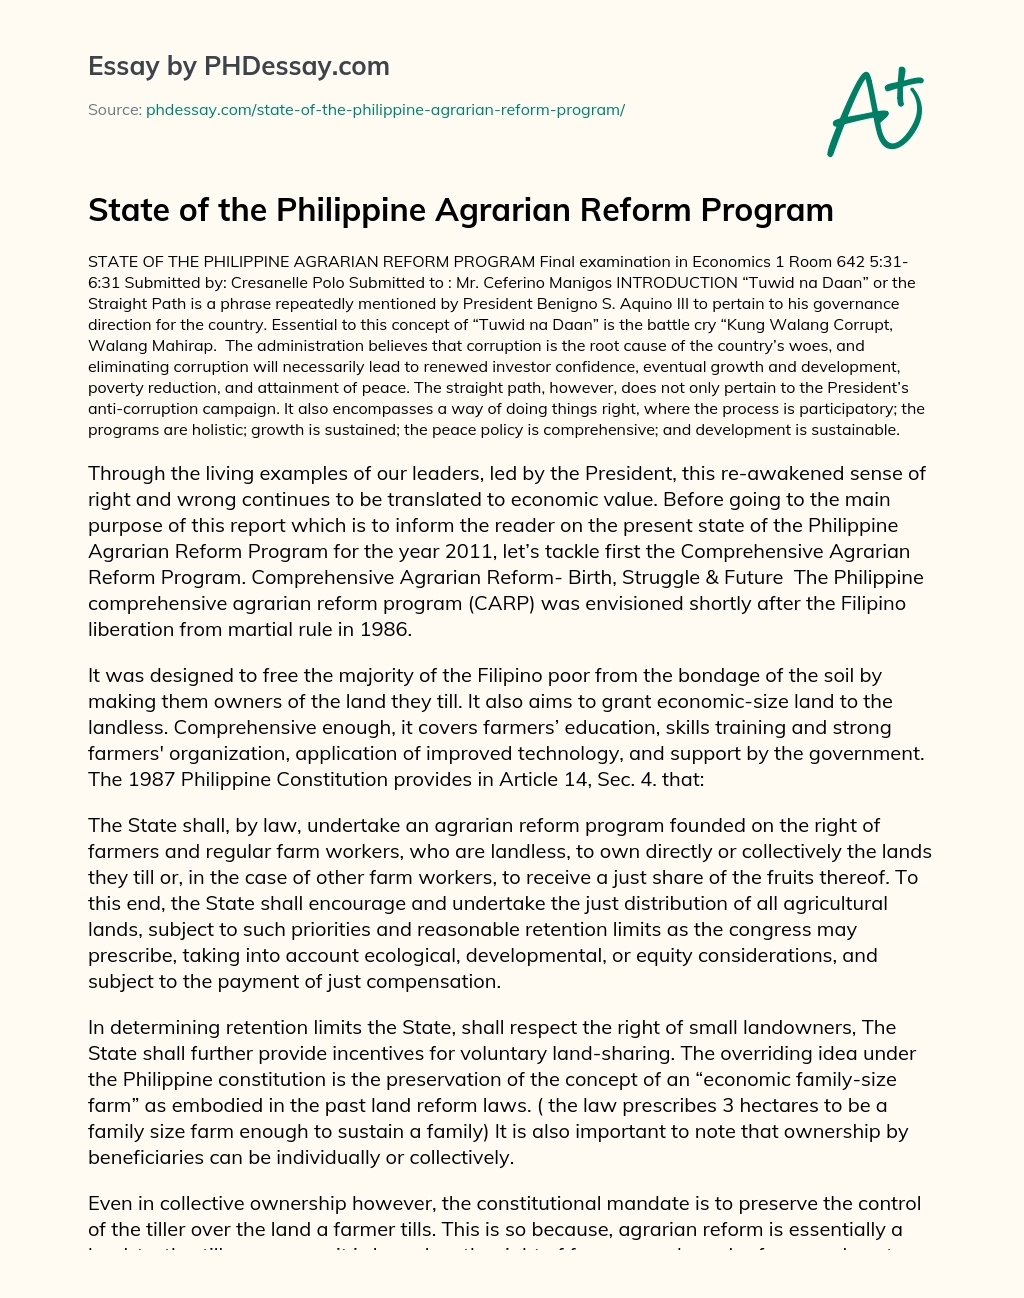 State of the Philippine Agrarian Reform Program essay